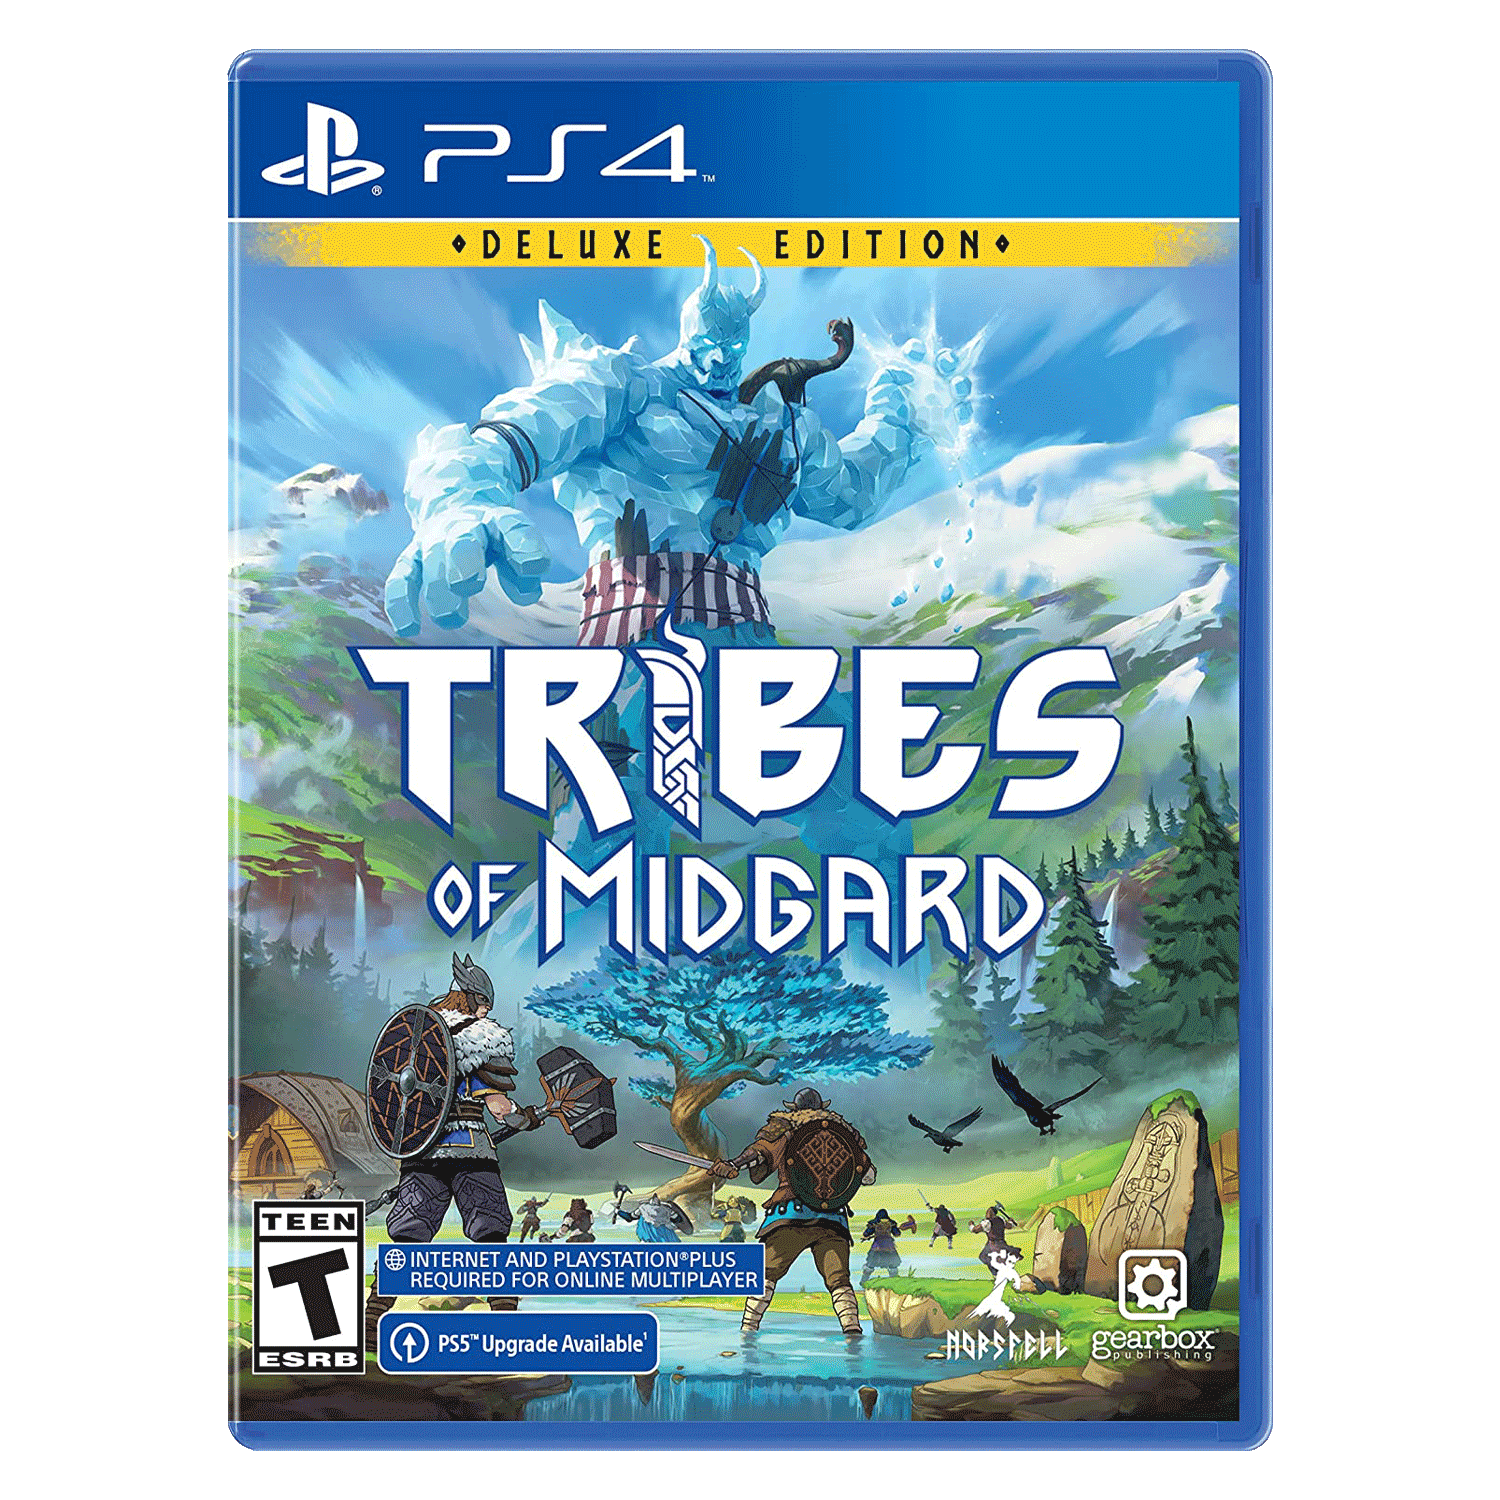 Jogo Tribes Of Midgard Deluxe Edition para PS4